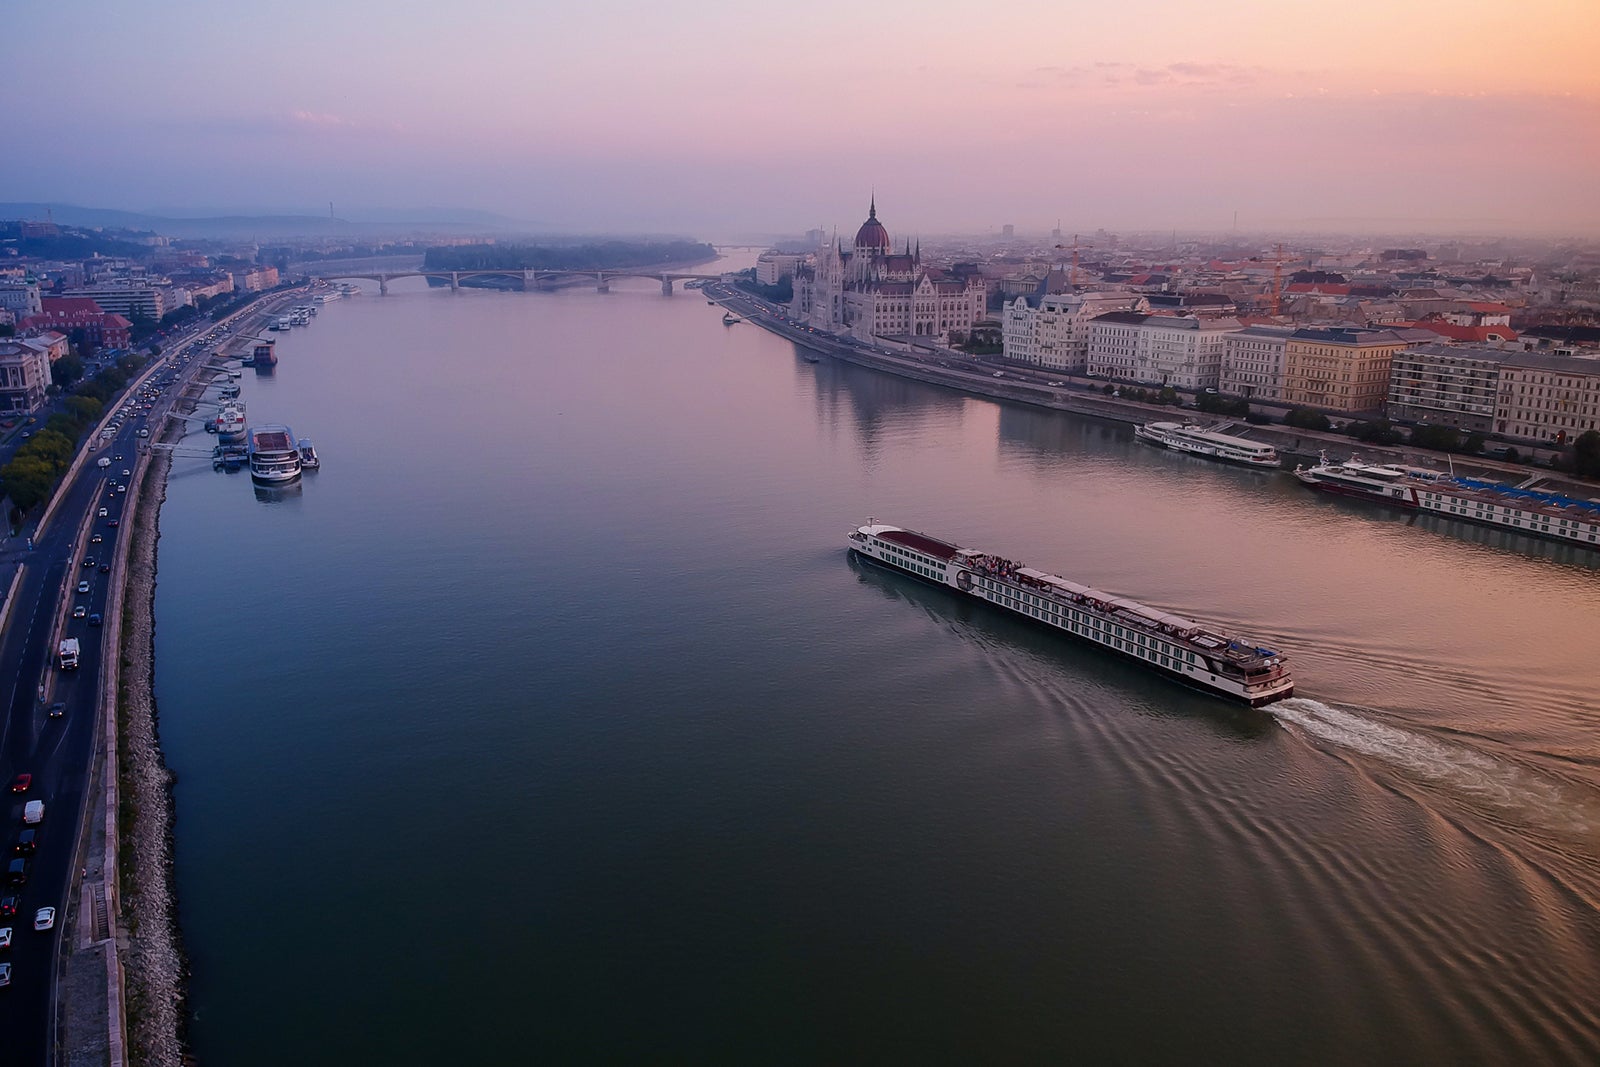 Calm Danube river in an early morning